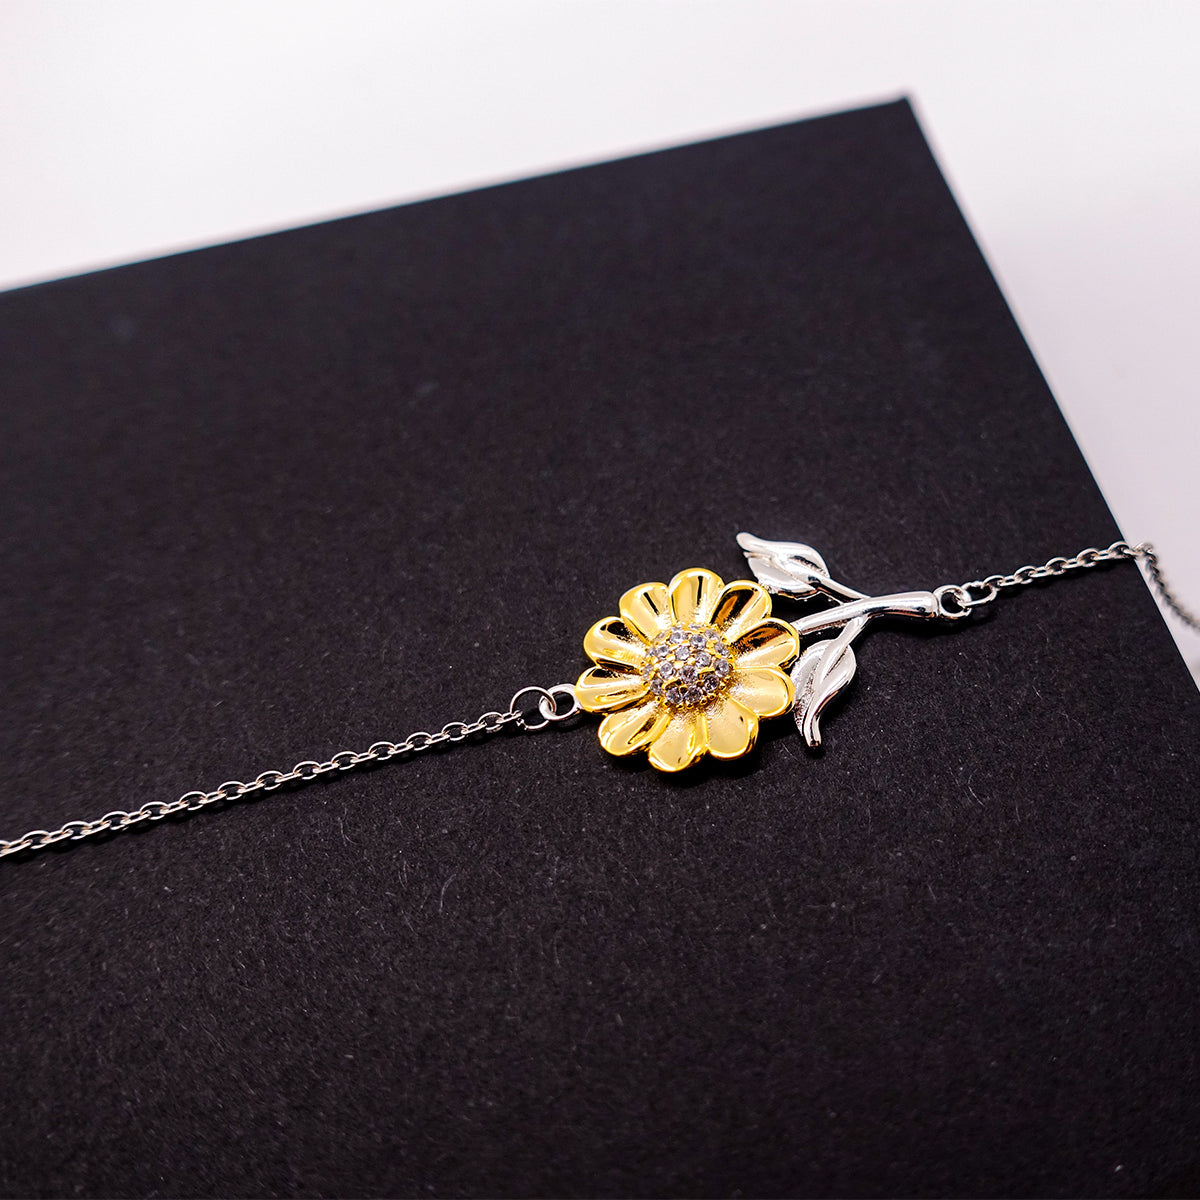 Daughter In Law Sunflower Bracelet, Never forget that I love you forever, Inspirational Daughter In Law Birthday Unique Gifts From Father In Law